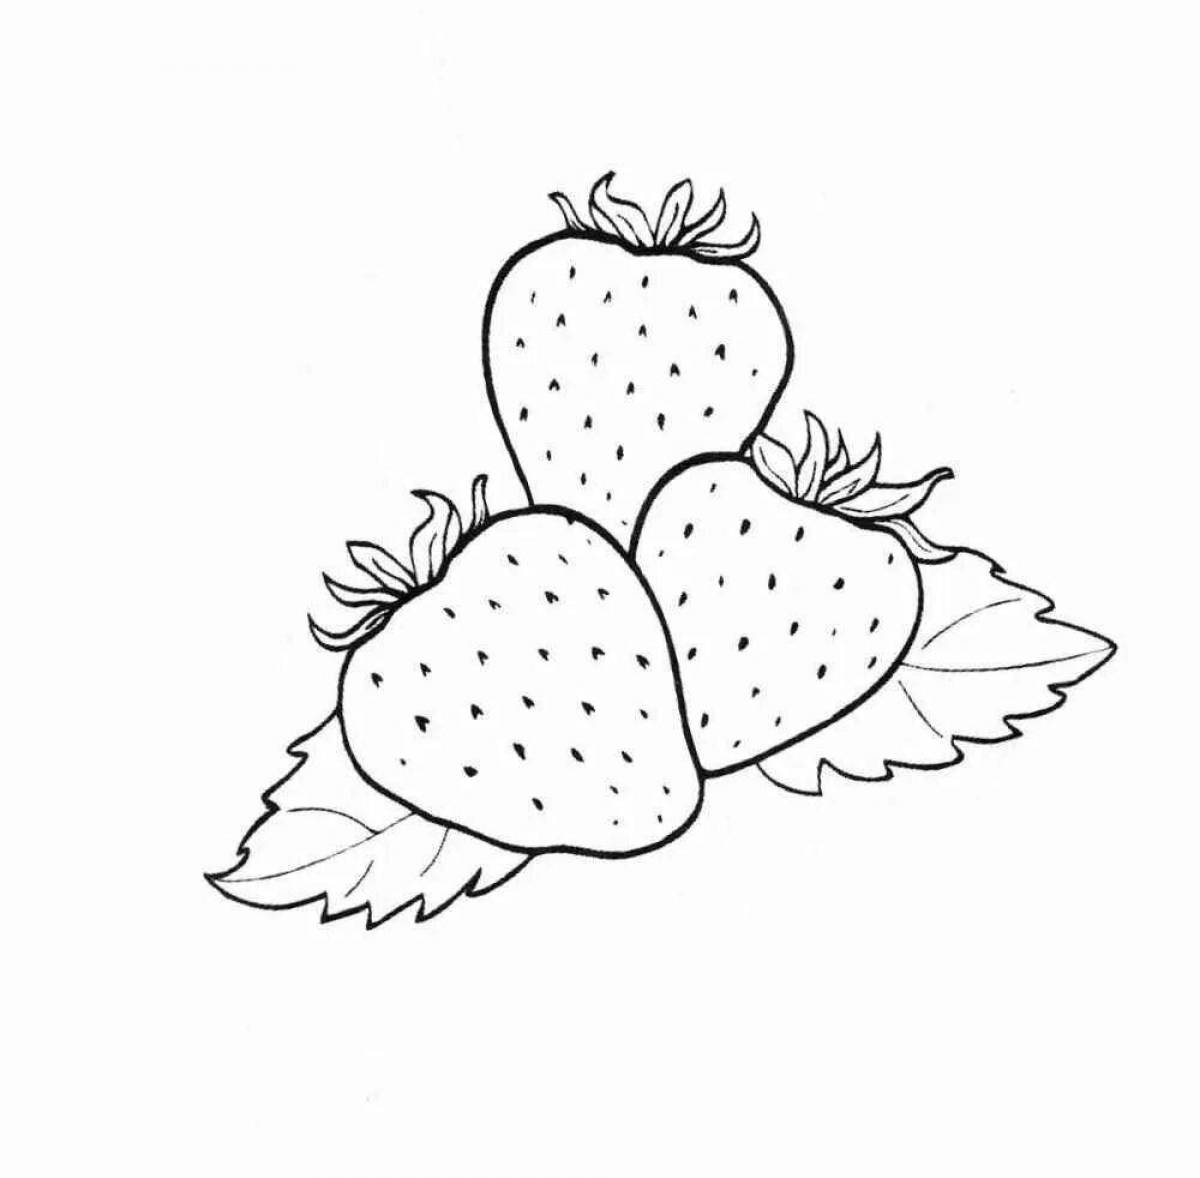 Adorable strawberry coloring book for kids